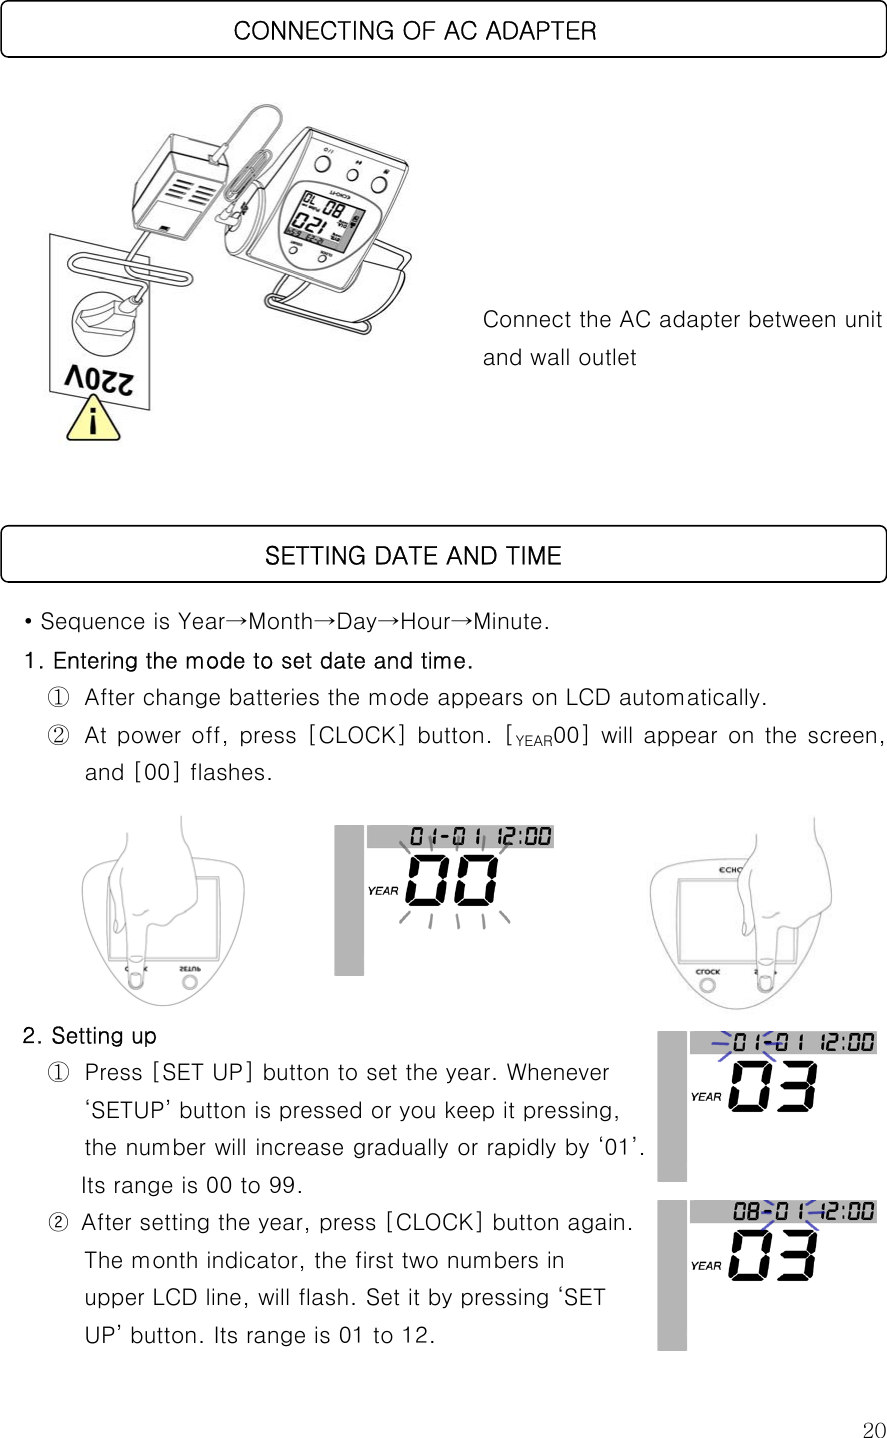  20        Connect the AC adapter between unit and wall outlet       • Sequence is Year→Month→Day→Hour→Minute. 1. Entering the mode to set date and time. ①  After change batteries the mode appears on LCD automatically.   ②  At power off, press [CLOCK] button. [YEAR00] will appear on  the screen, and [00] flashes.         2. Setting up   ①  Press [SET UP] button to set the year. Whenever   ‘SETUP’ button is pressed or you keep it pressing, the number will increase gradually or rapidly by ‘01’. Its range is 00 to 99. ②  After setting the year, press [CLOCK] button again.               The month indicator, the first two numbers in upper LCD line, will flash. Set it by pressing ‘SET   UP’ button. Its range is 01 to 12.                          SETTING DATE AND TIME                       CONNECTING OF AC ADAPTER 